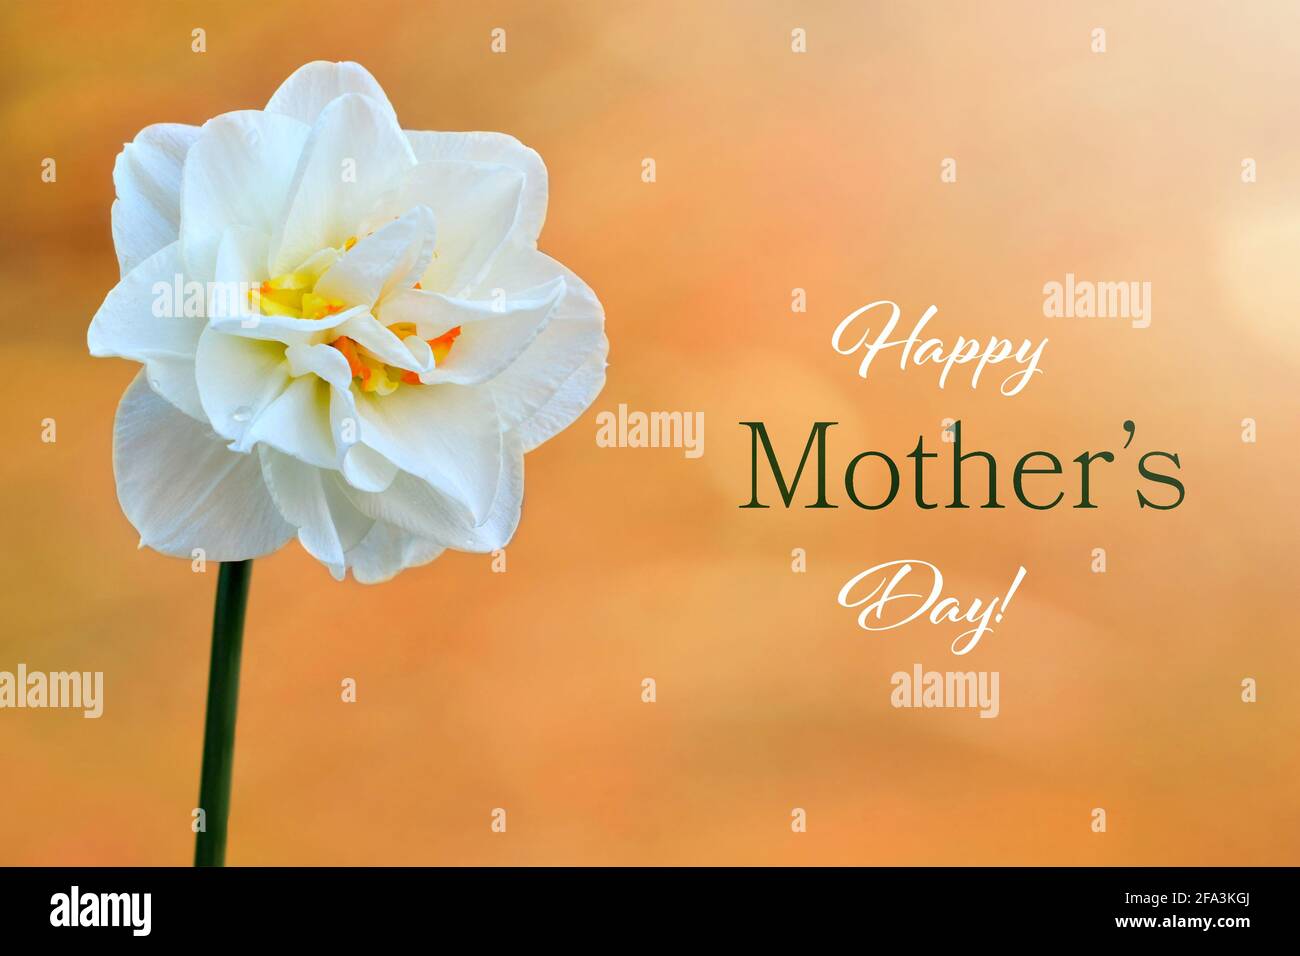 Happy Mothers Day greeting card with daffodil flower Stock Photo